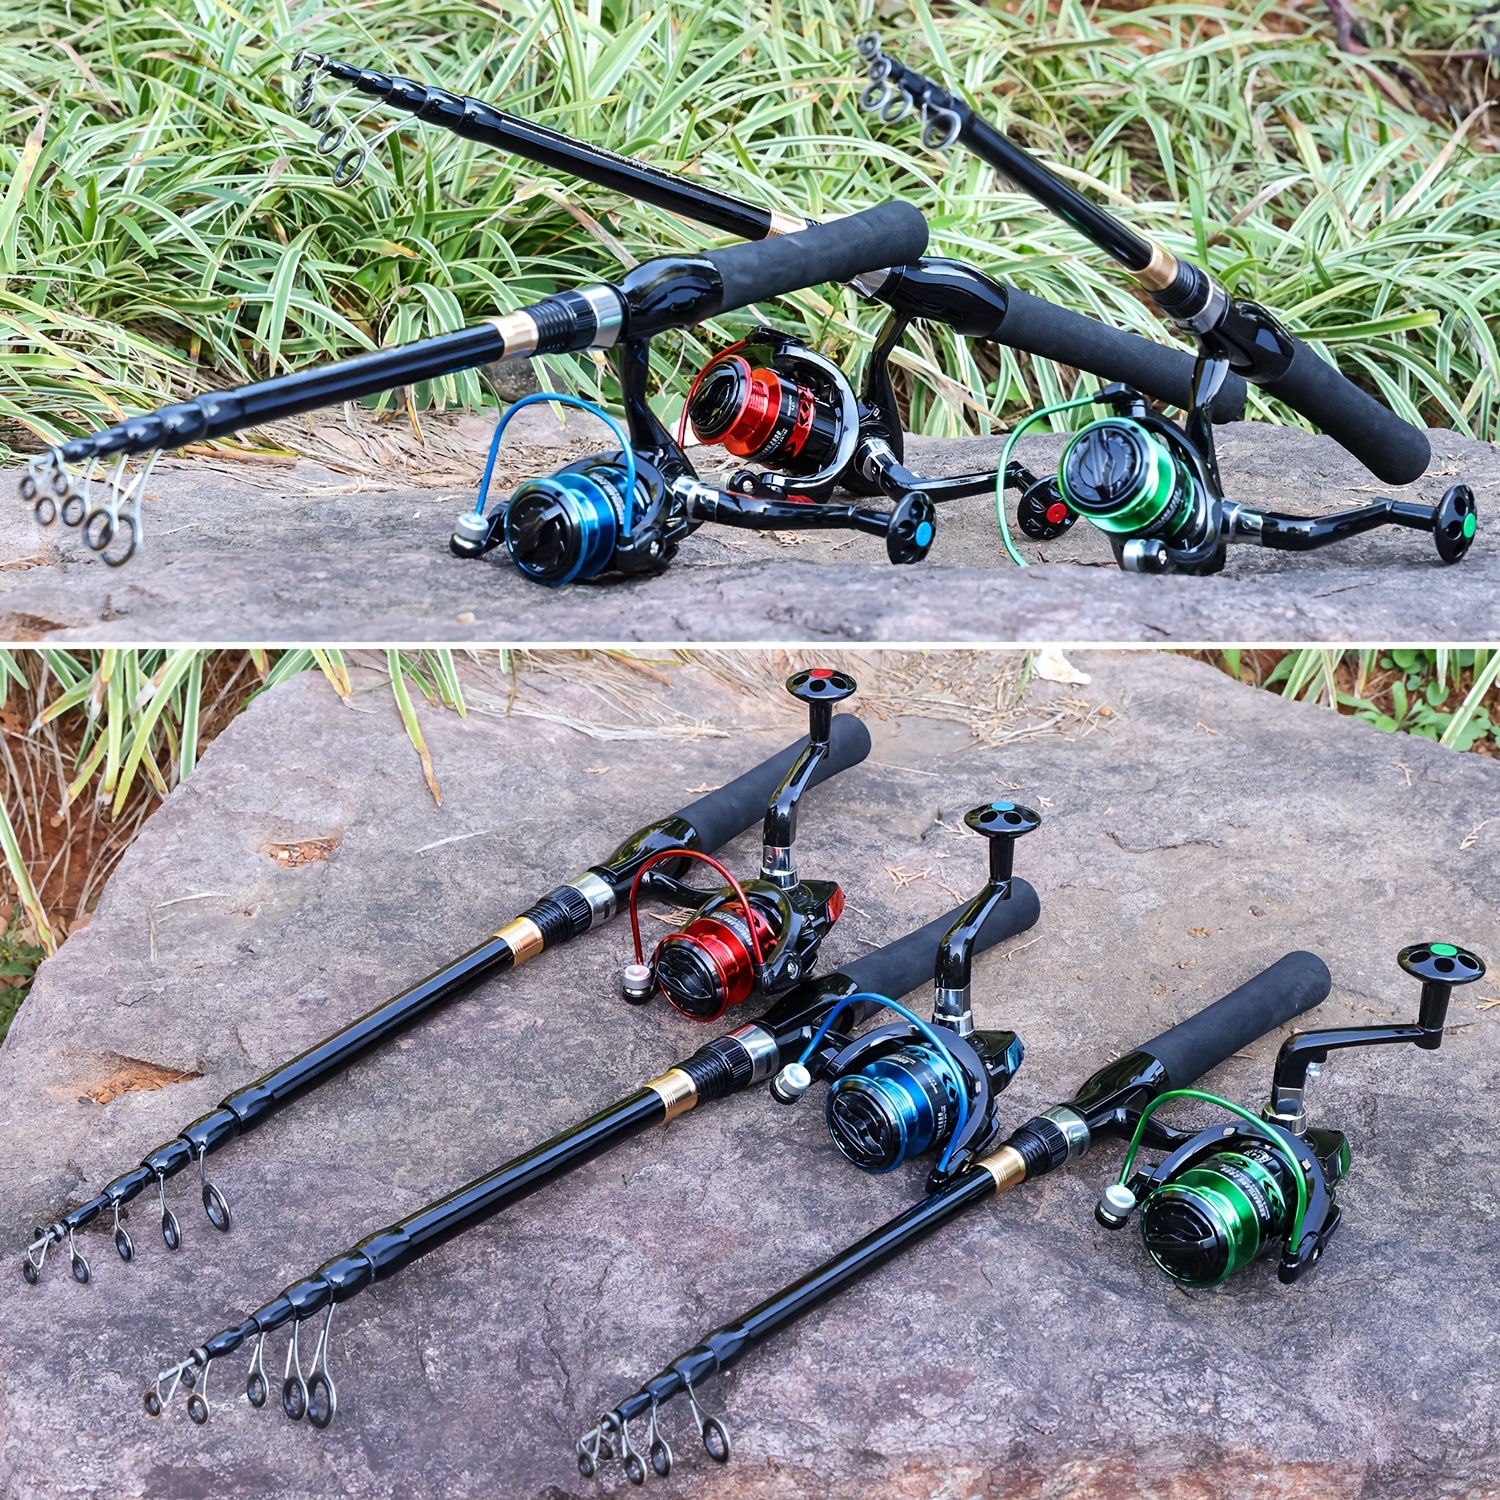 Sougayilang Compound Fishing Bow Set Rods And Reels With 5.2/1 Gear Ratio,  1.8/2.1m Max Drag Rod For Freshwater Bass 231030 From Ren06, $24.24